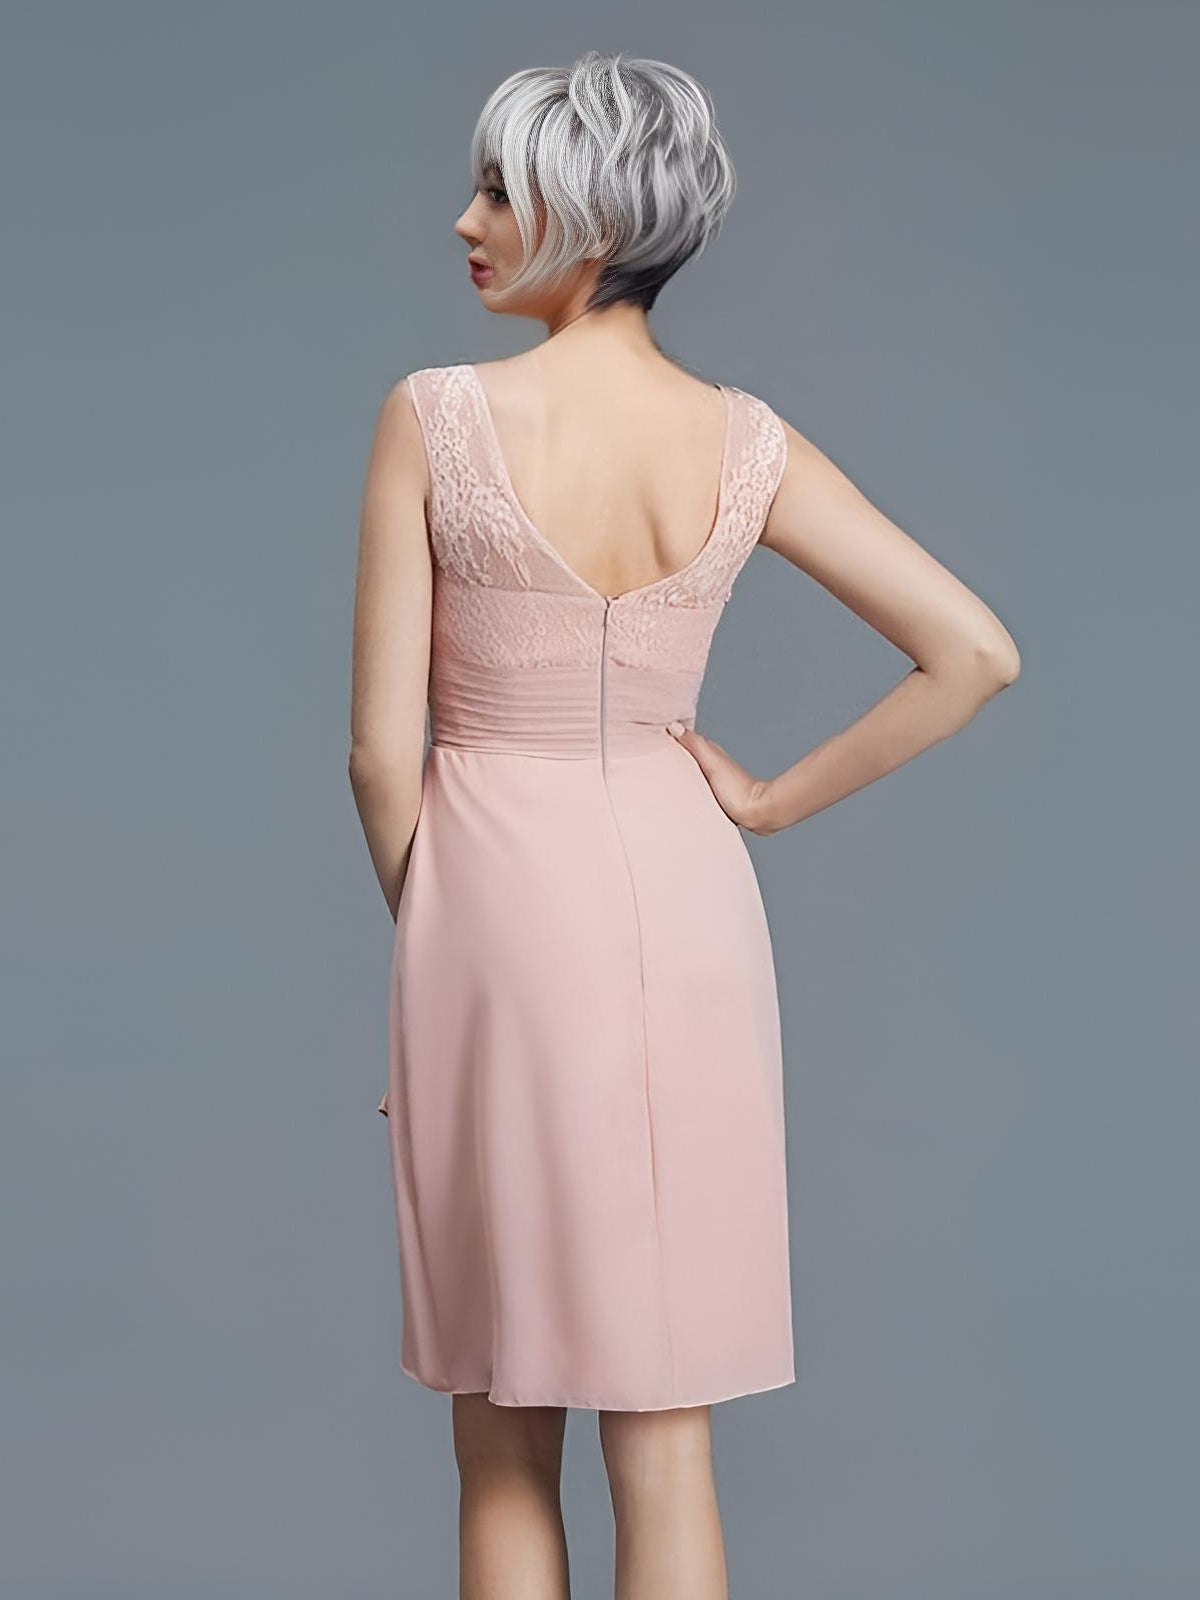 Mother of the Groom  with grey hair in chiffon and lace backless sleeveless dress.